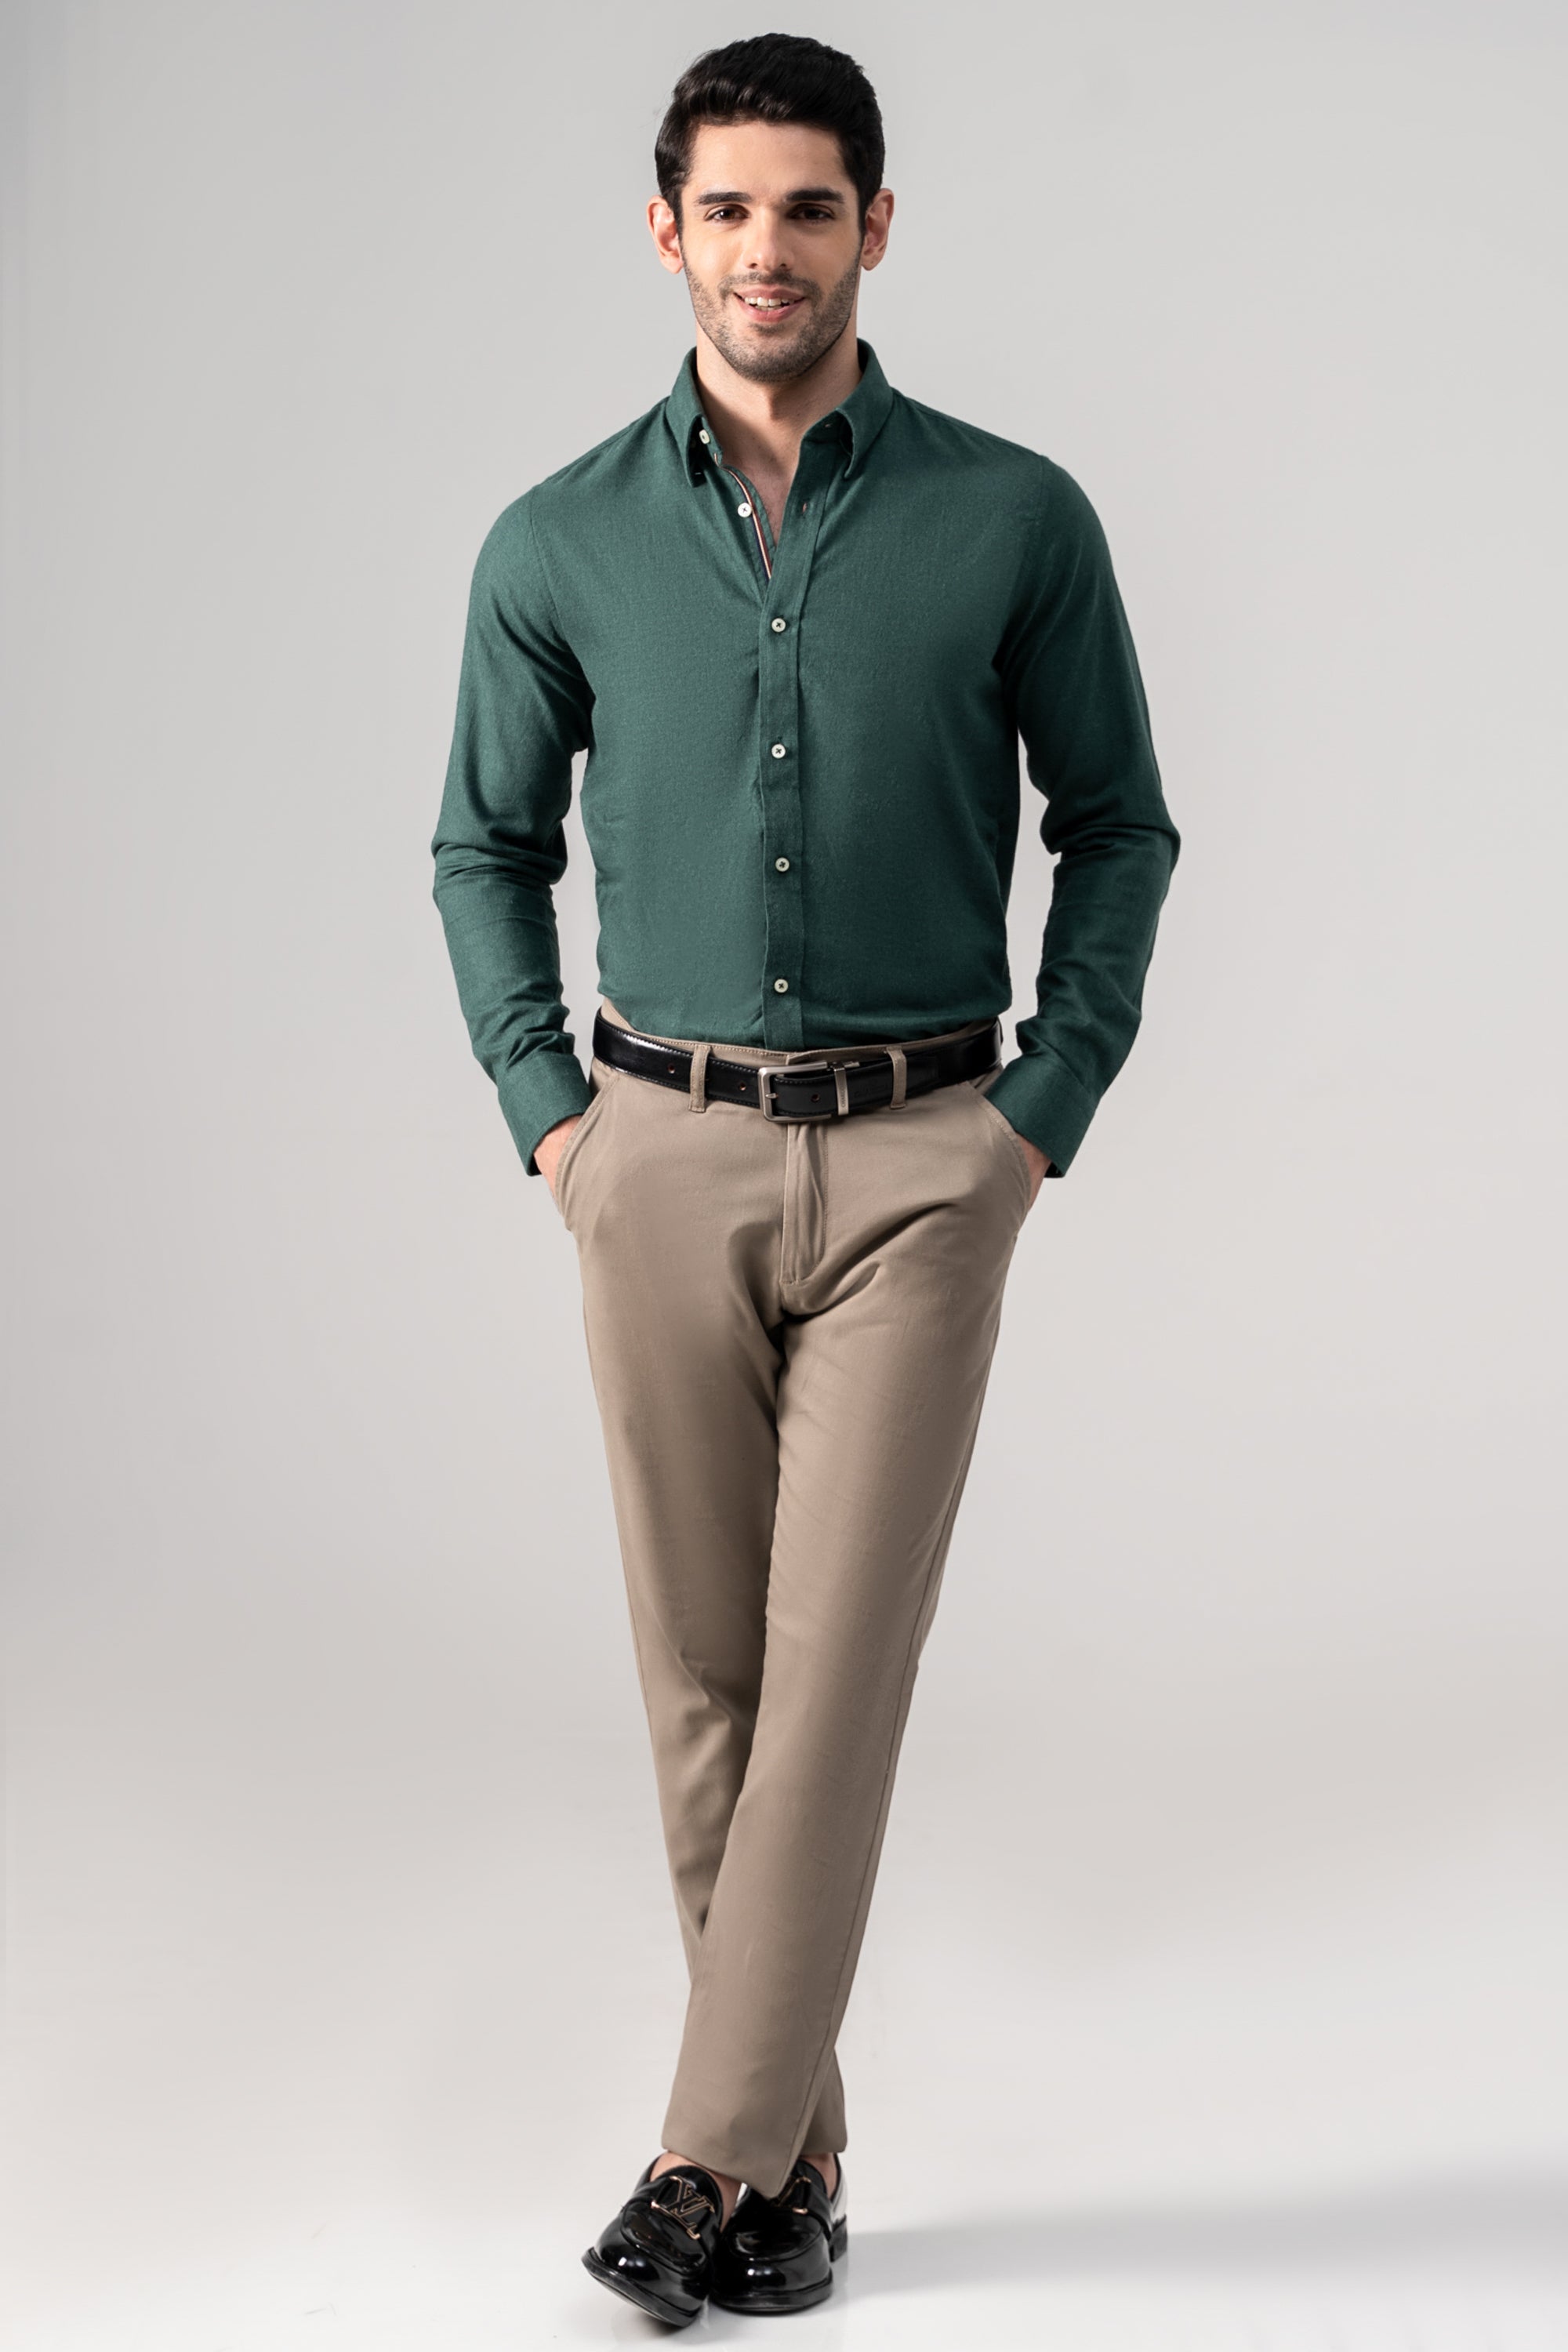 What color shirt should I wear with a pink jacket and green pants? - Quora